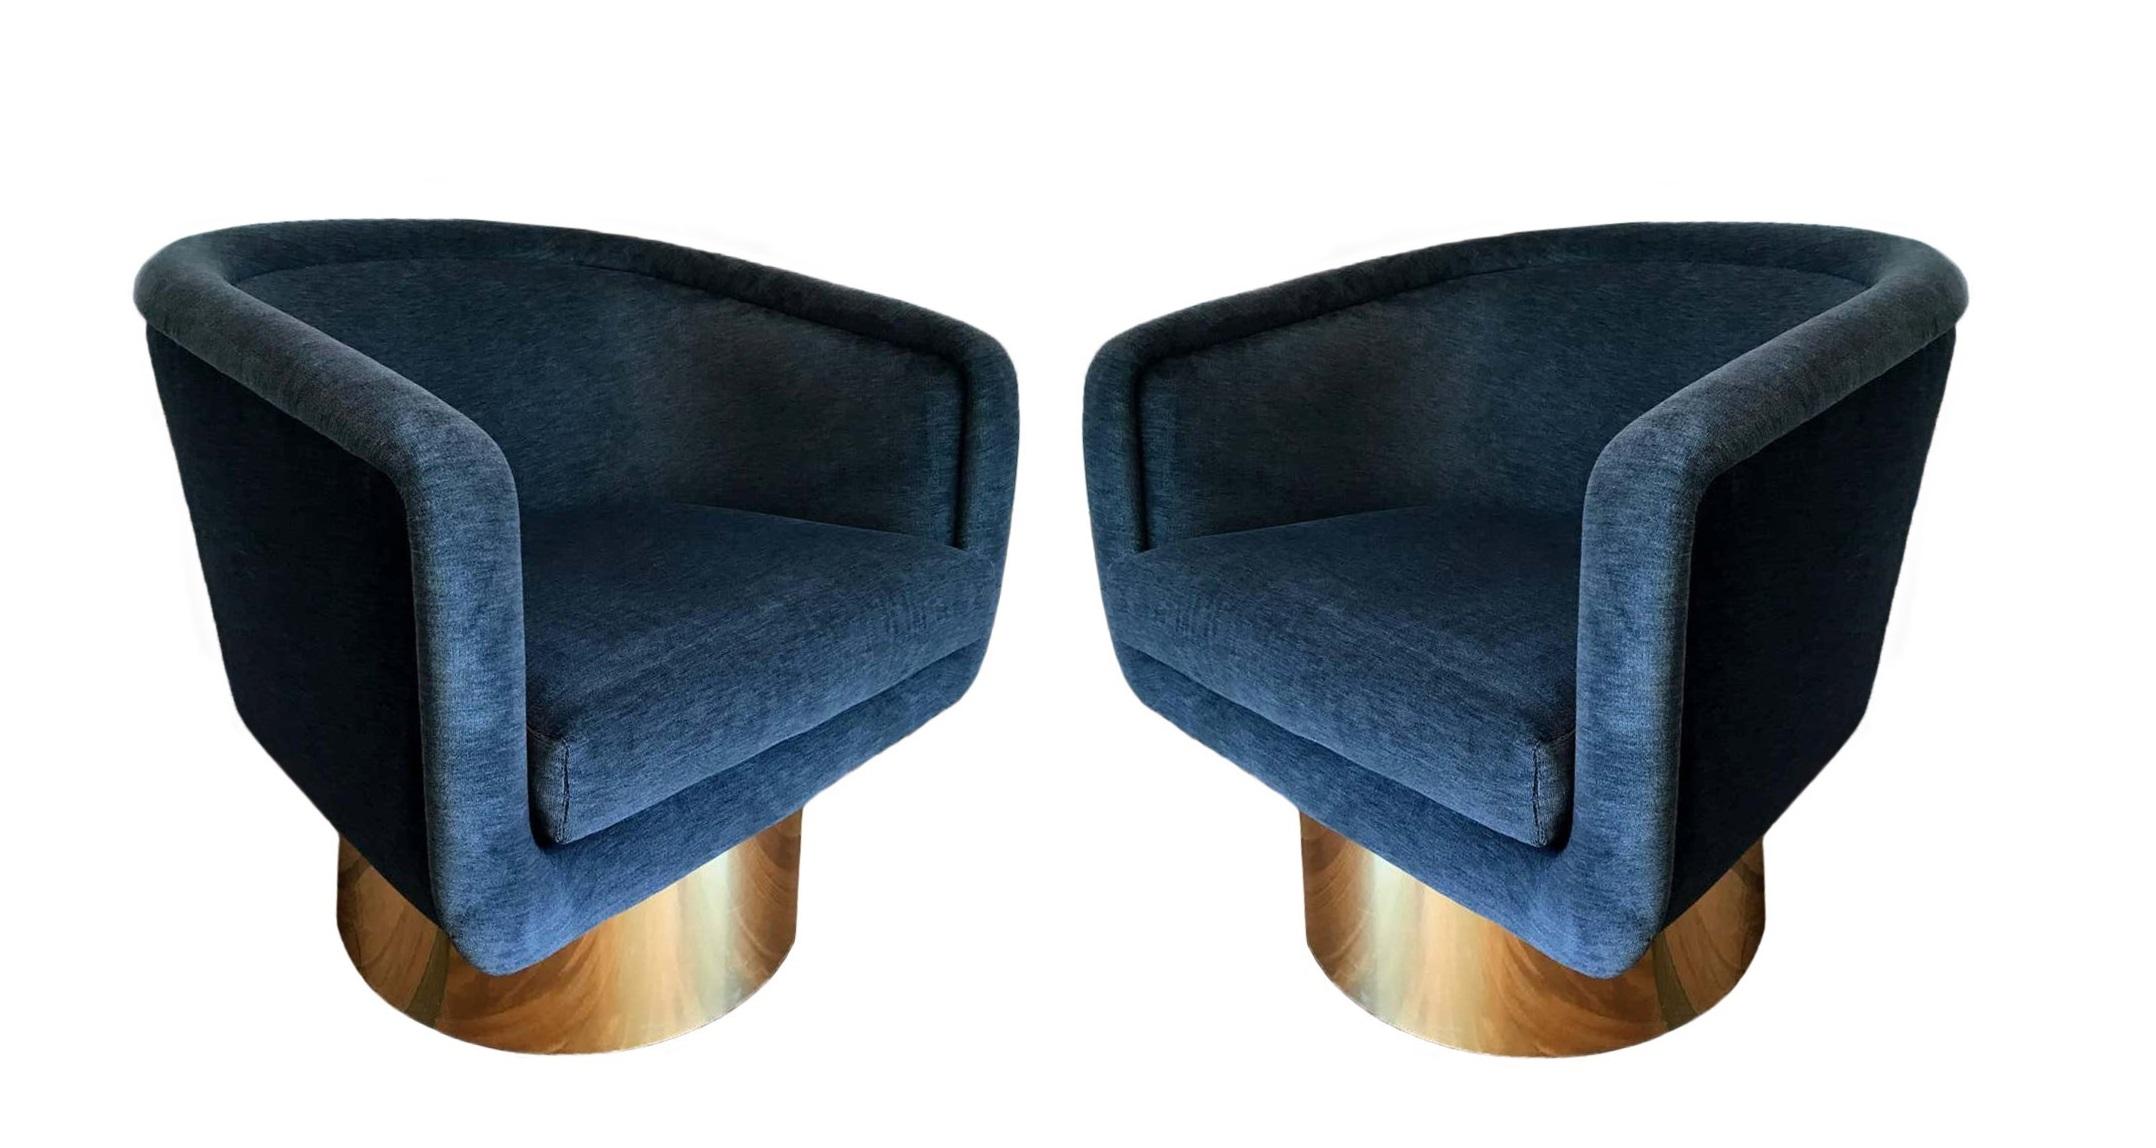 Pair of swivel club/lounge chairs designed by Leon Rosen for The Pace Collection, circa 1970. Upholstered barrel back frames with loose cushion. Newly reupholstered in a velvet fabric with polished brass cylindrical pedestal bases. These chairs are